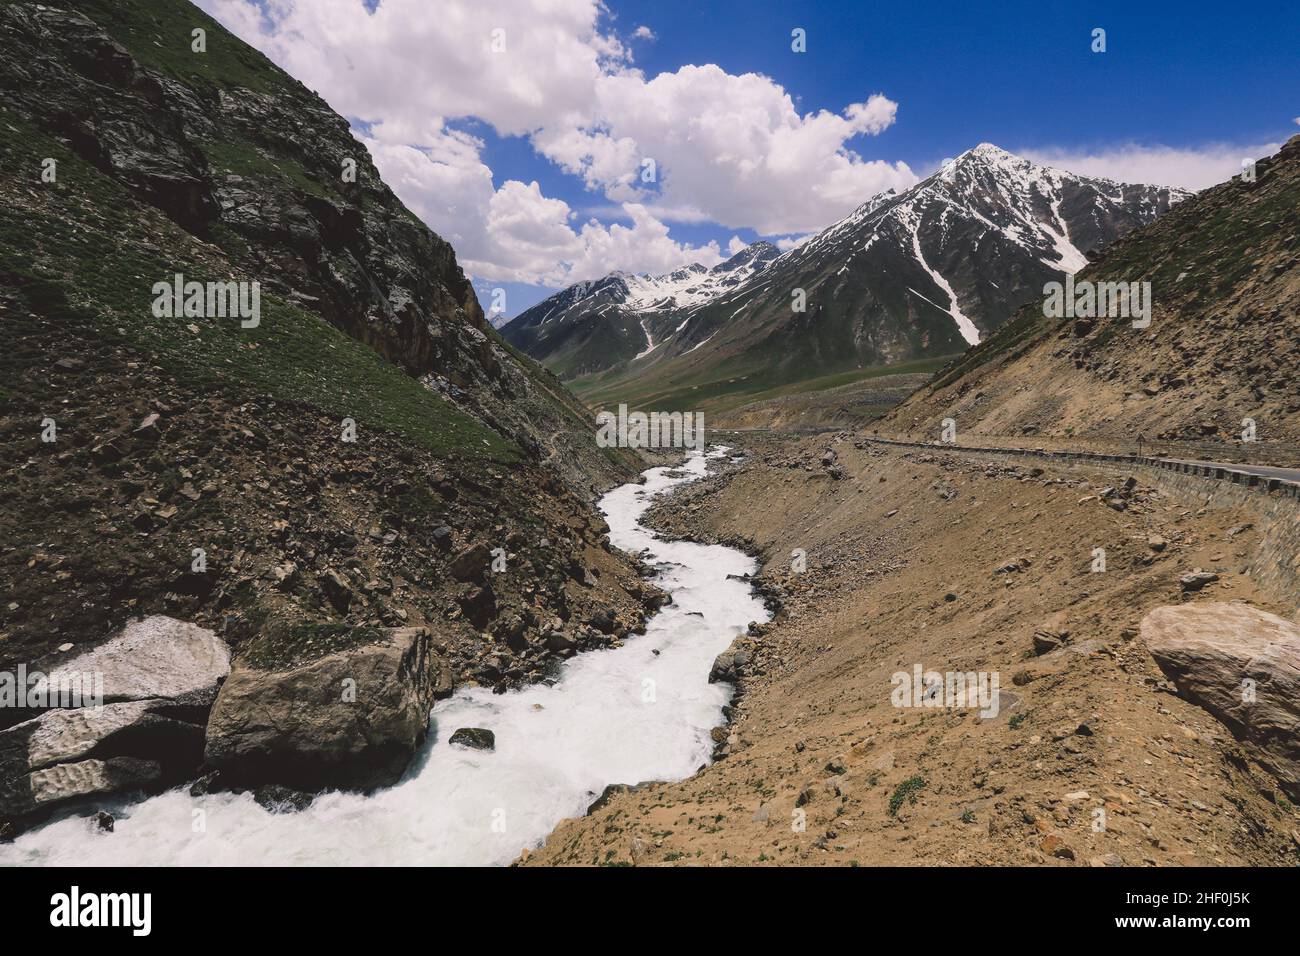 Mountain River in Gilgit Baltistan Highlands under the Blue and Cloudy Sky, Pakistan Stock Photo